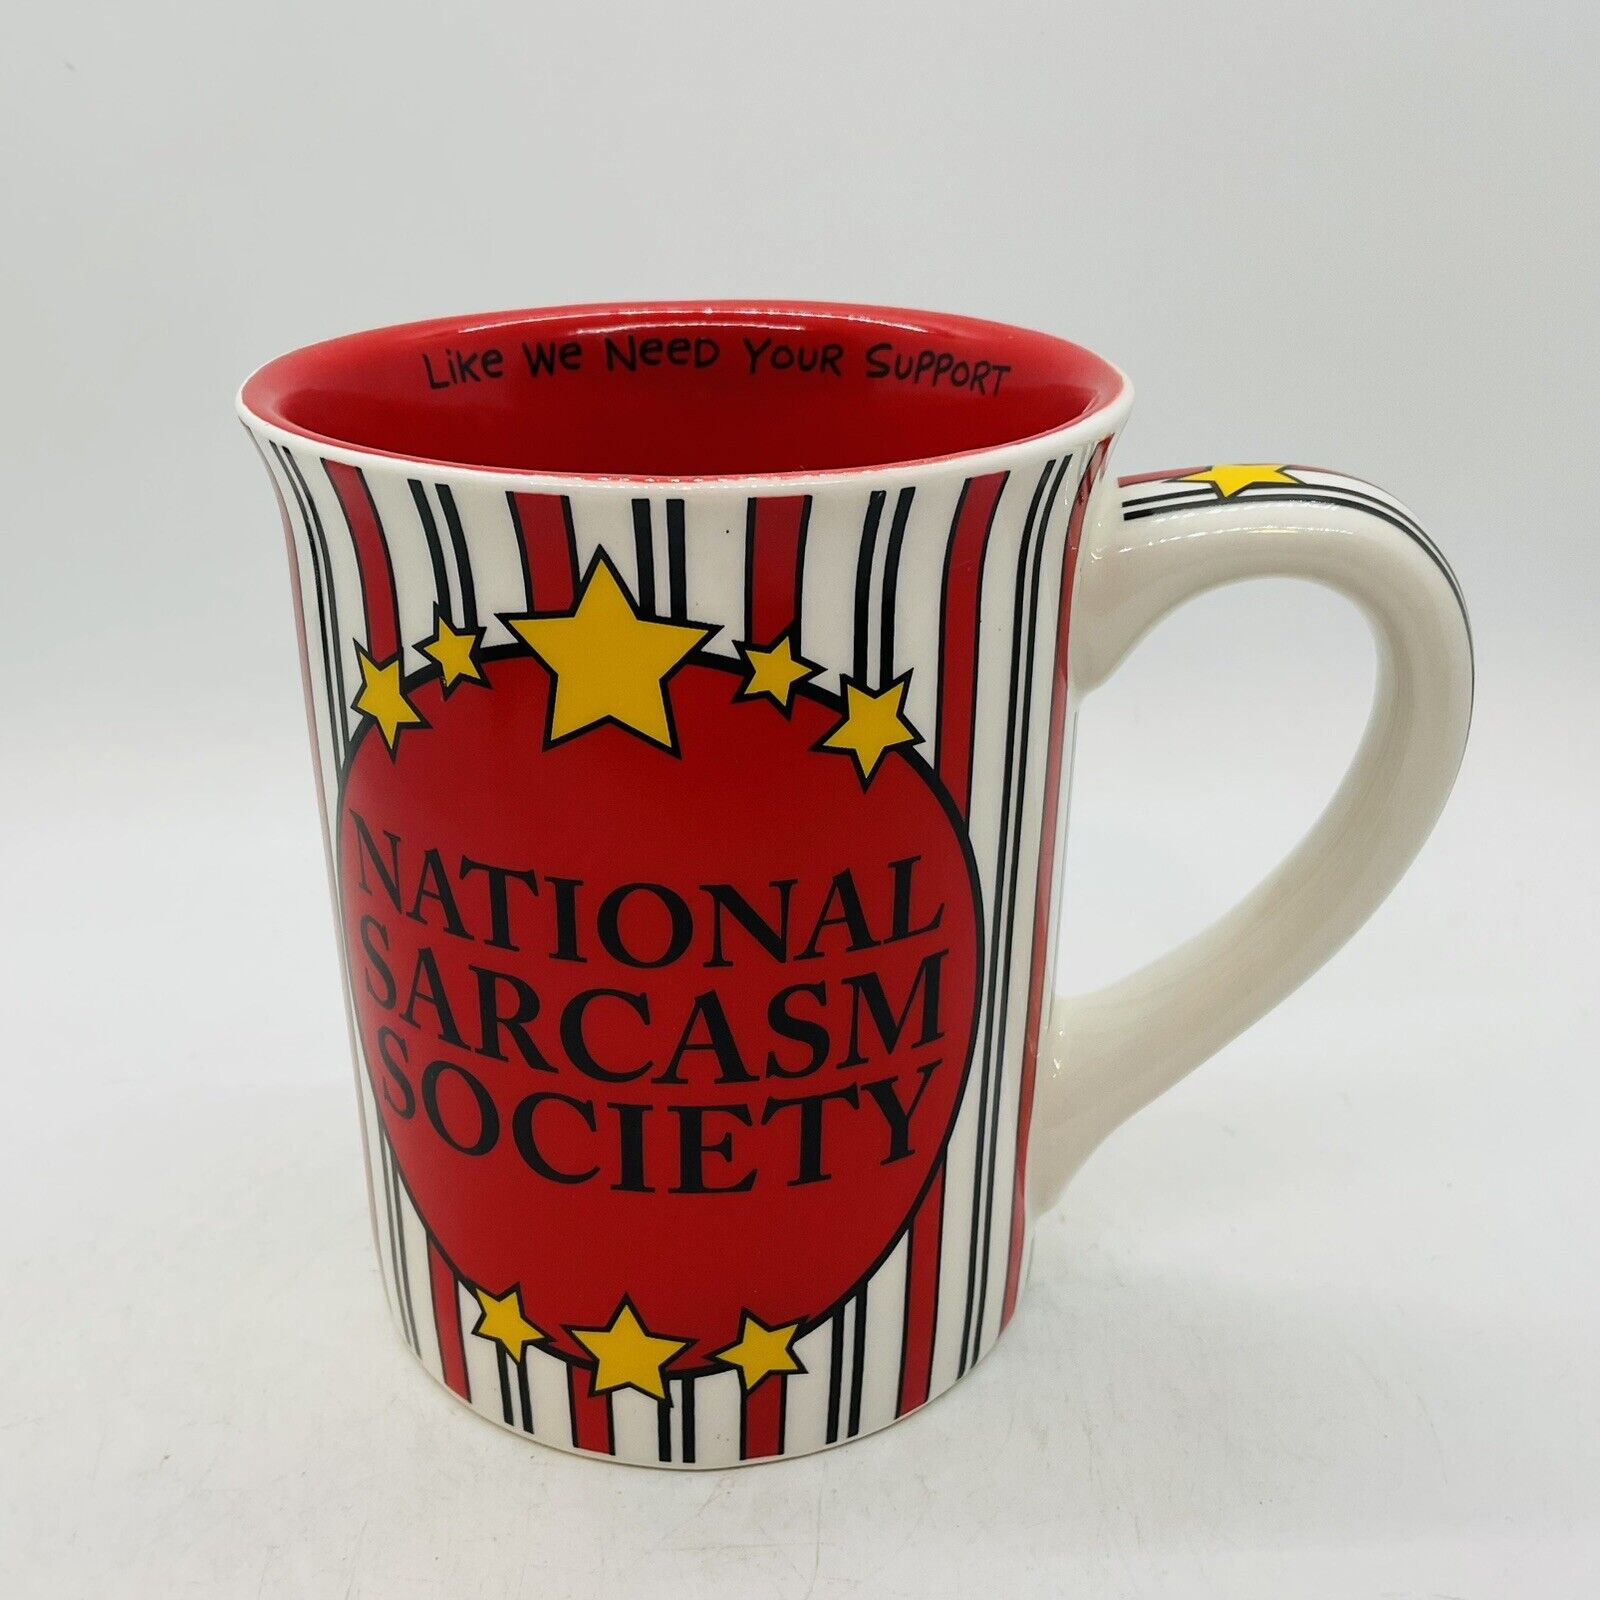 National Sarcasm Society Coffee Mug By Our Name is Mud&Lorrie Veasey 12OZ